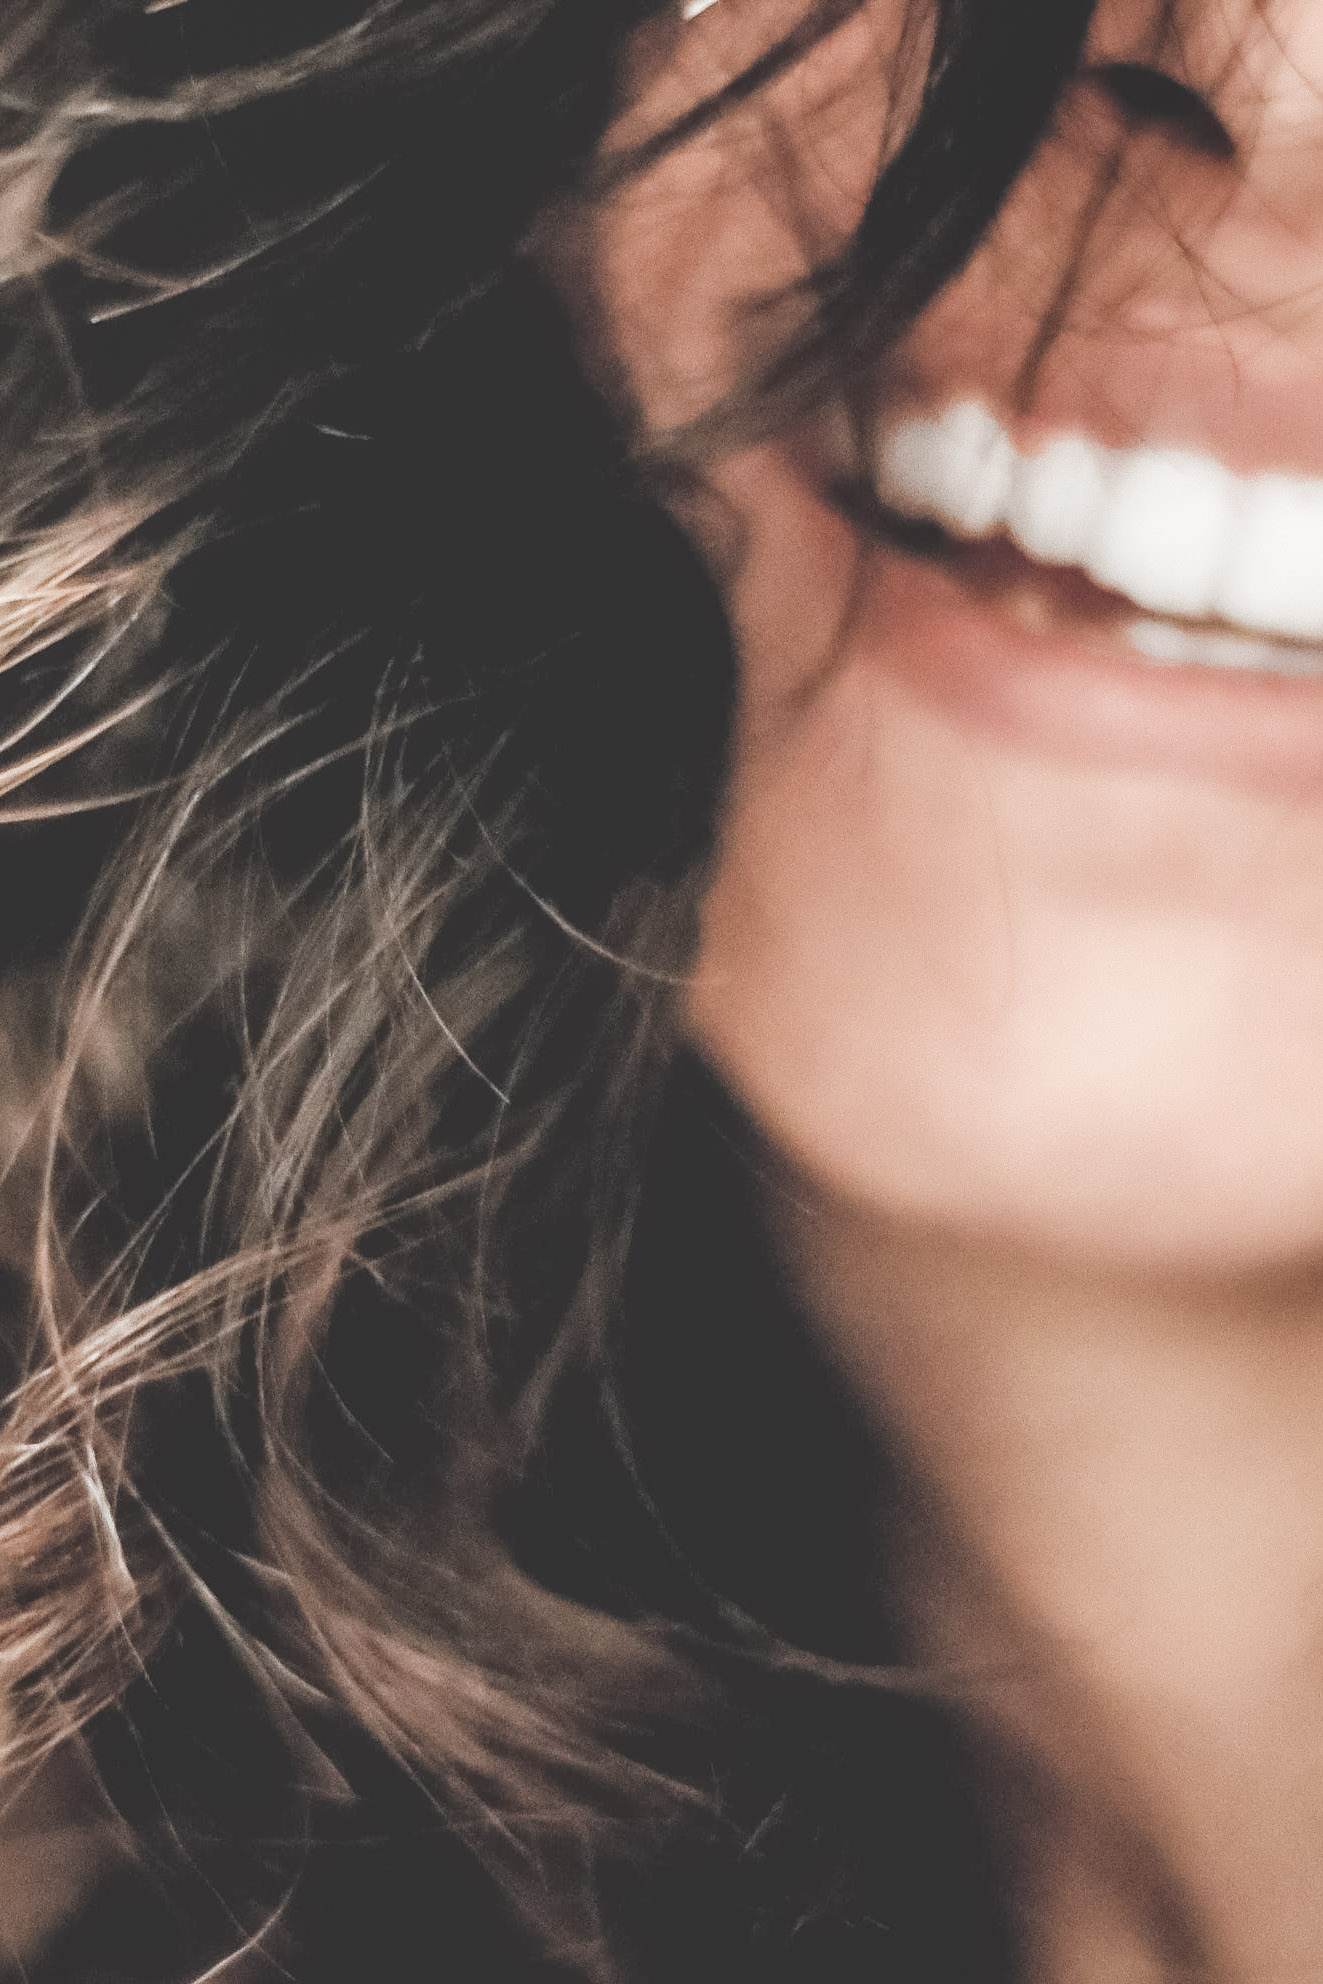 All You Need to Know About Getting a Bright Smile